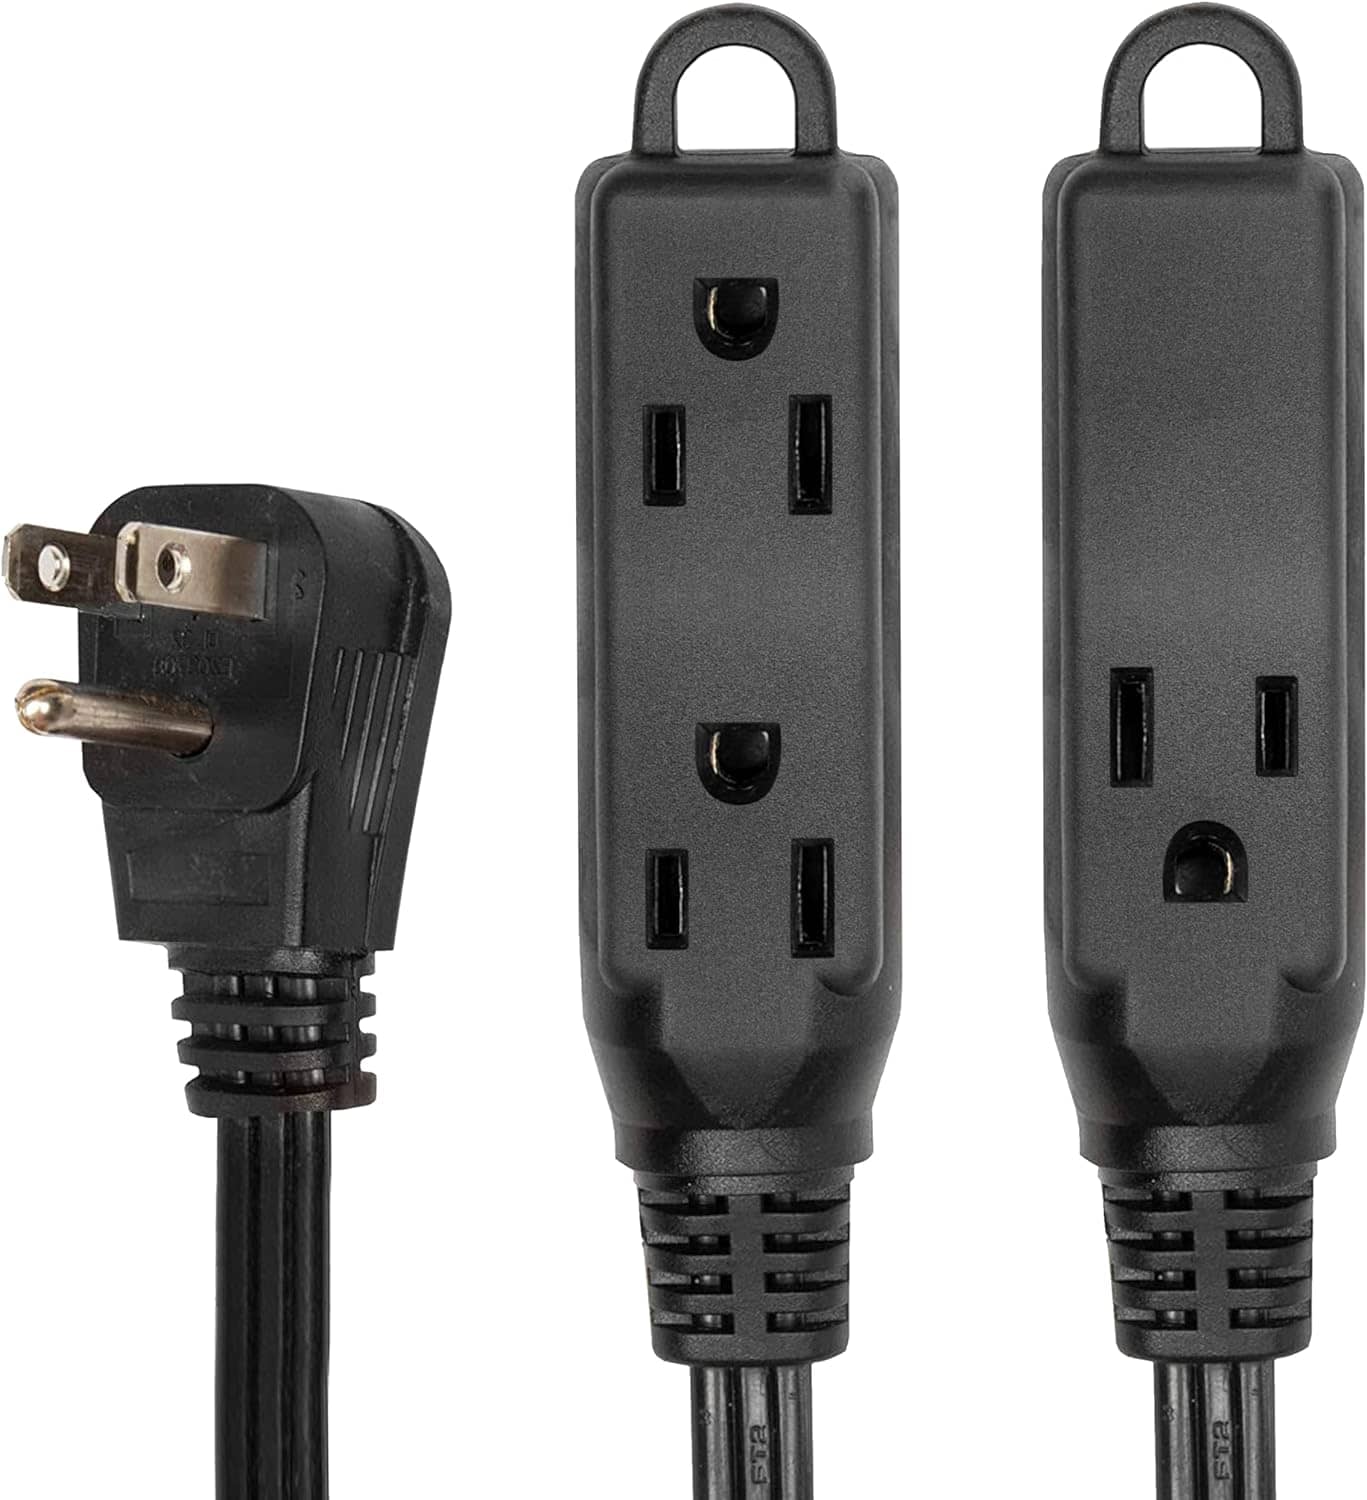 10-Ft-Extension-Cord-with-3-Electrical-Power-Outlet-16-3-Durable-Black-Cable